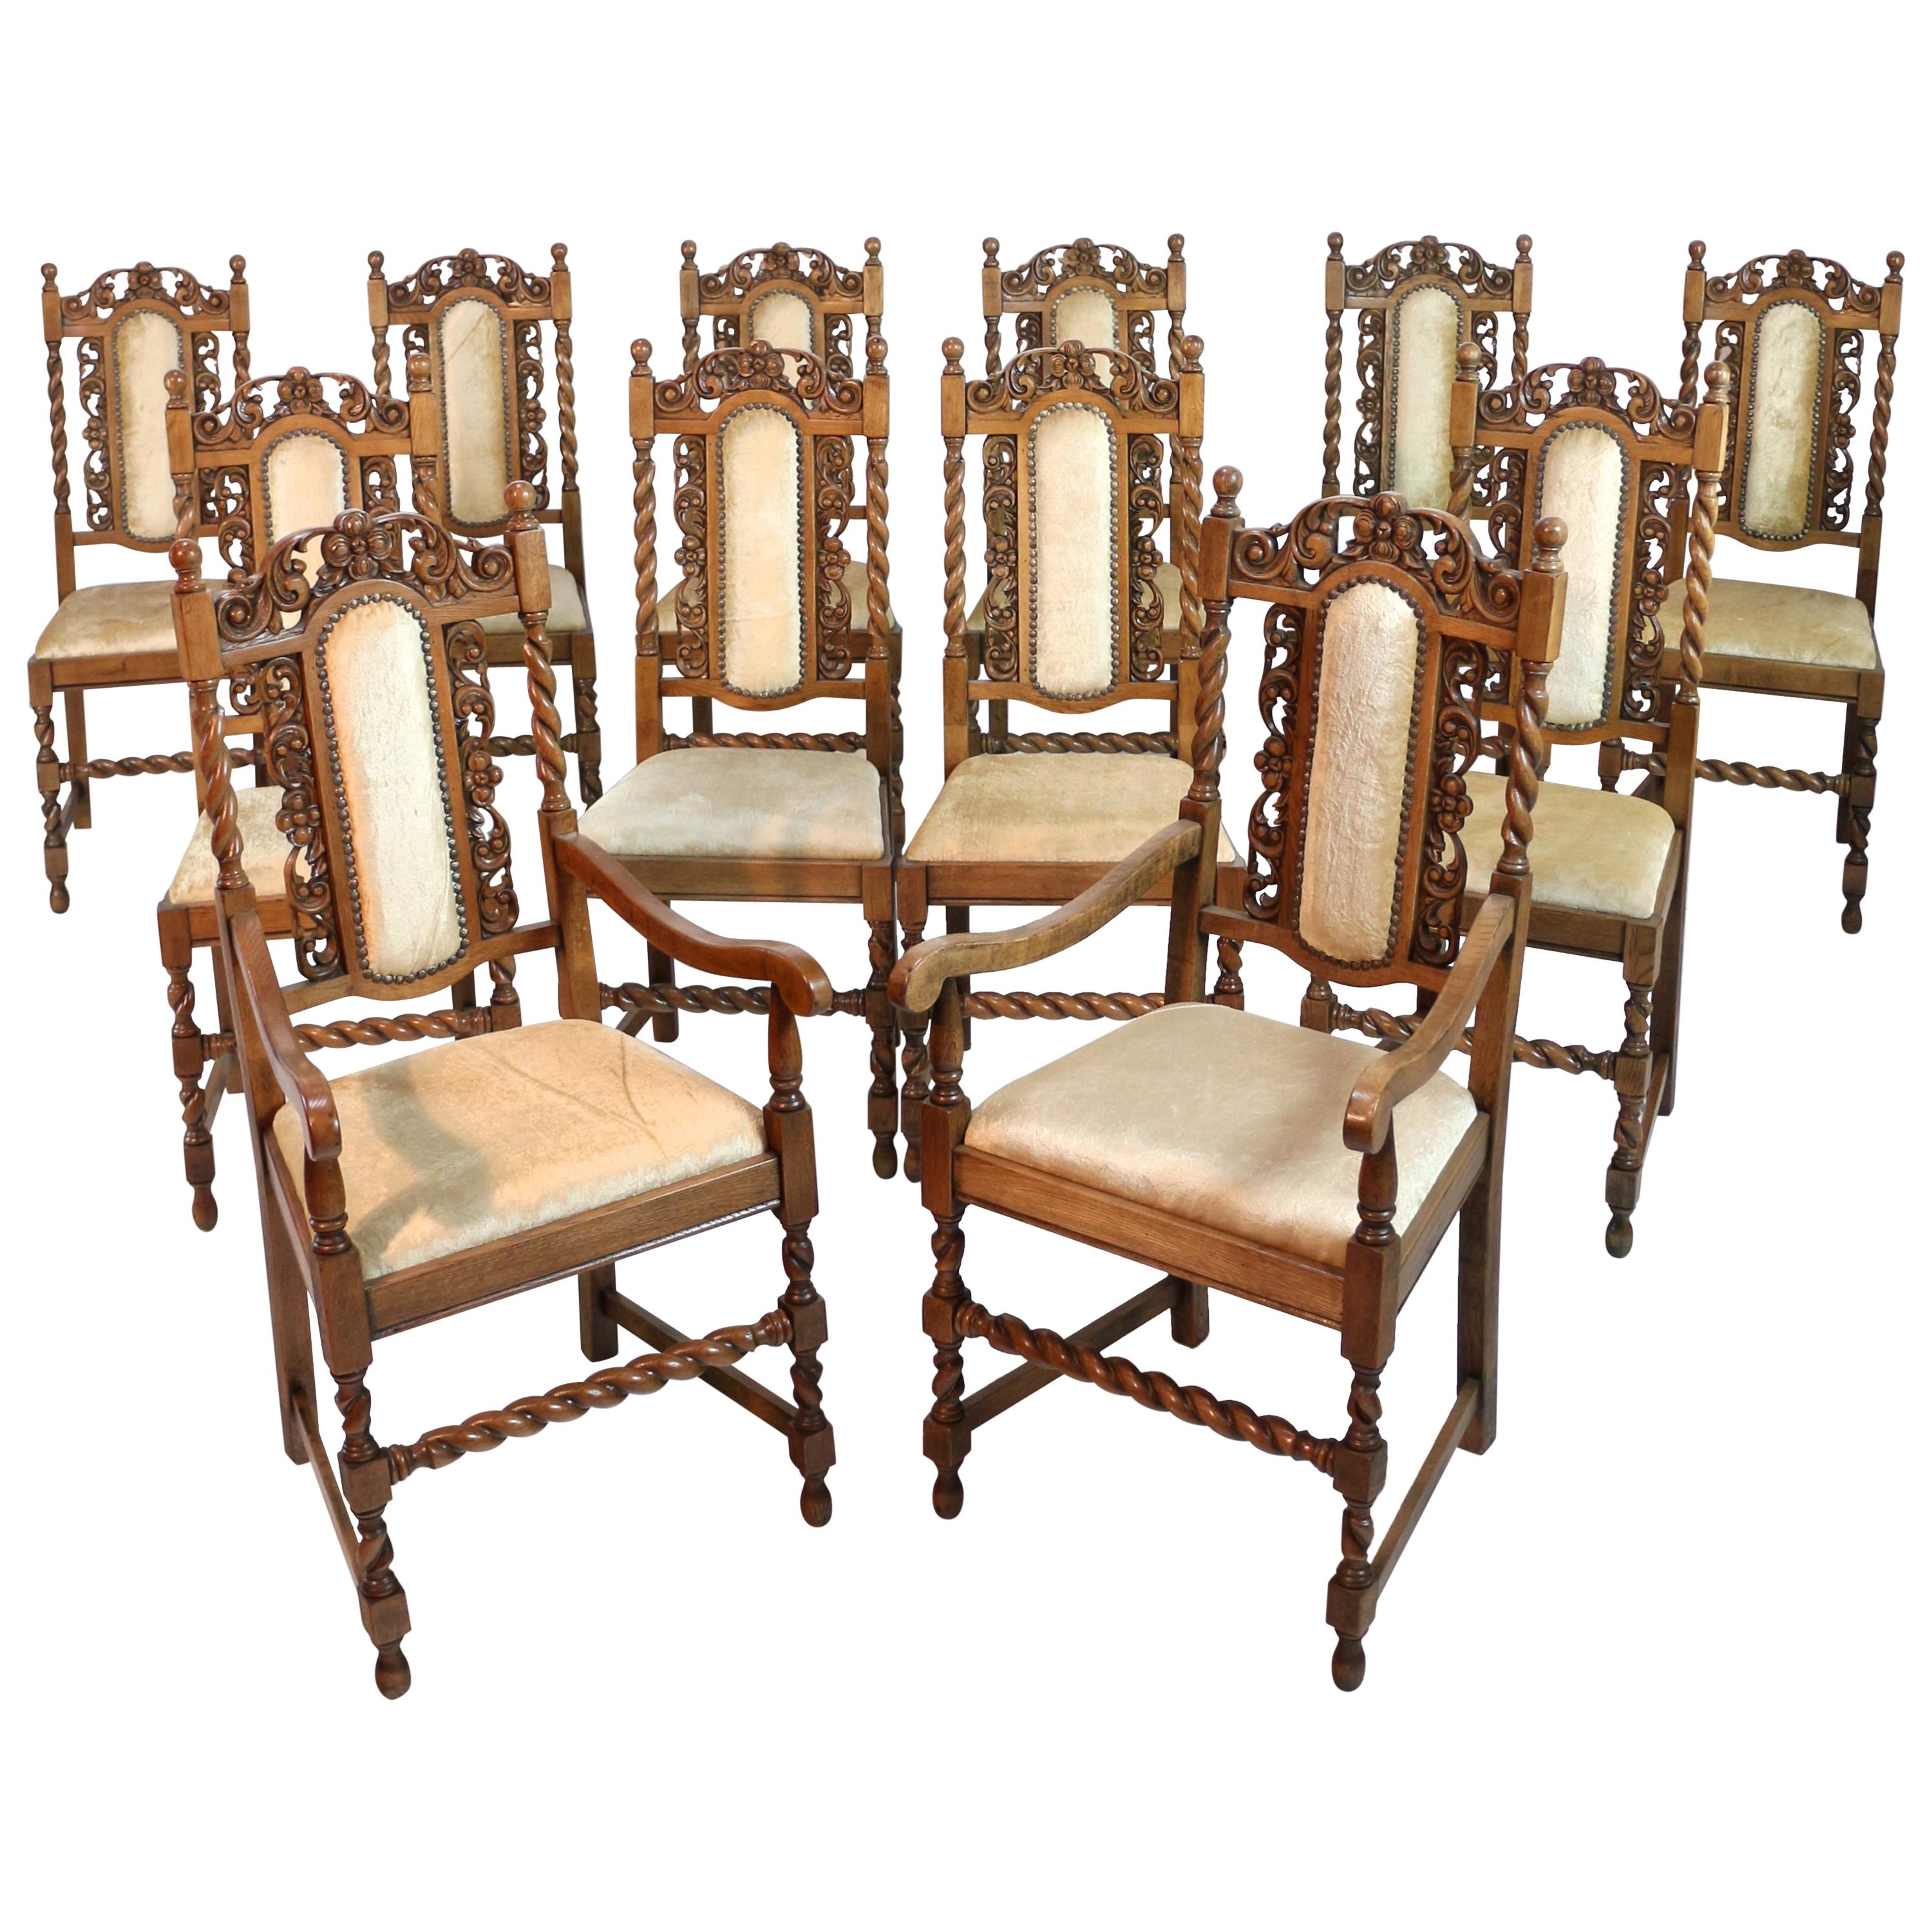 Set of 12 Antique Jacobean Revival Carved Oak Barley-Twist Dining Chairs